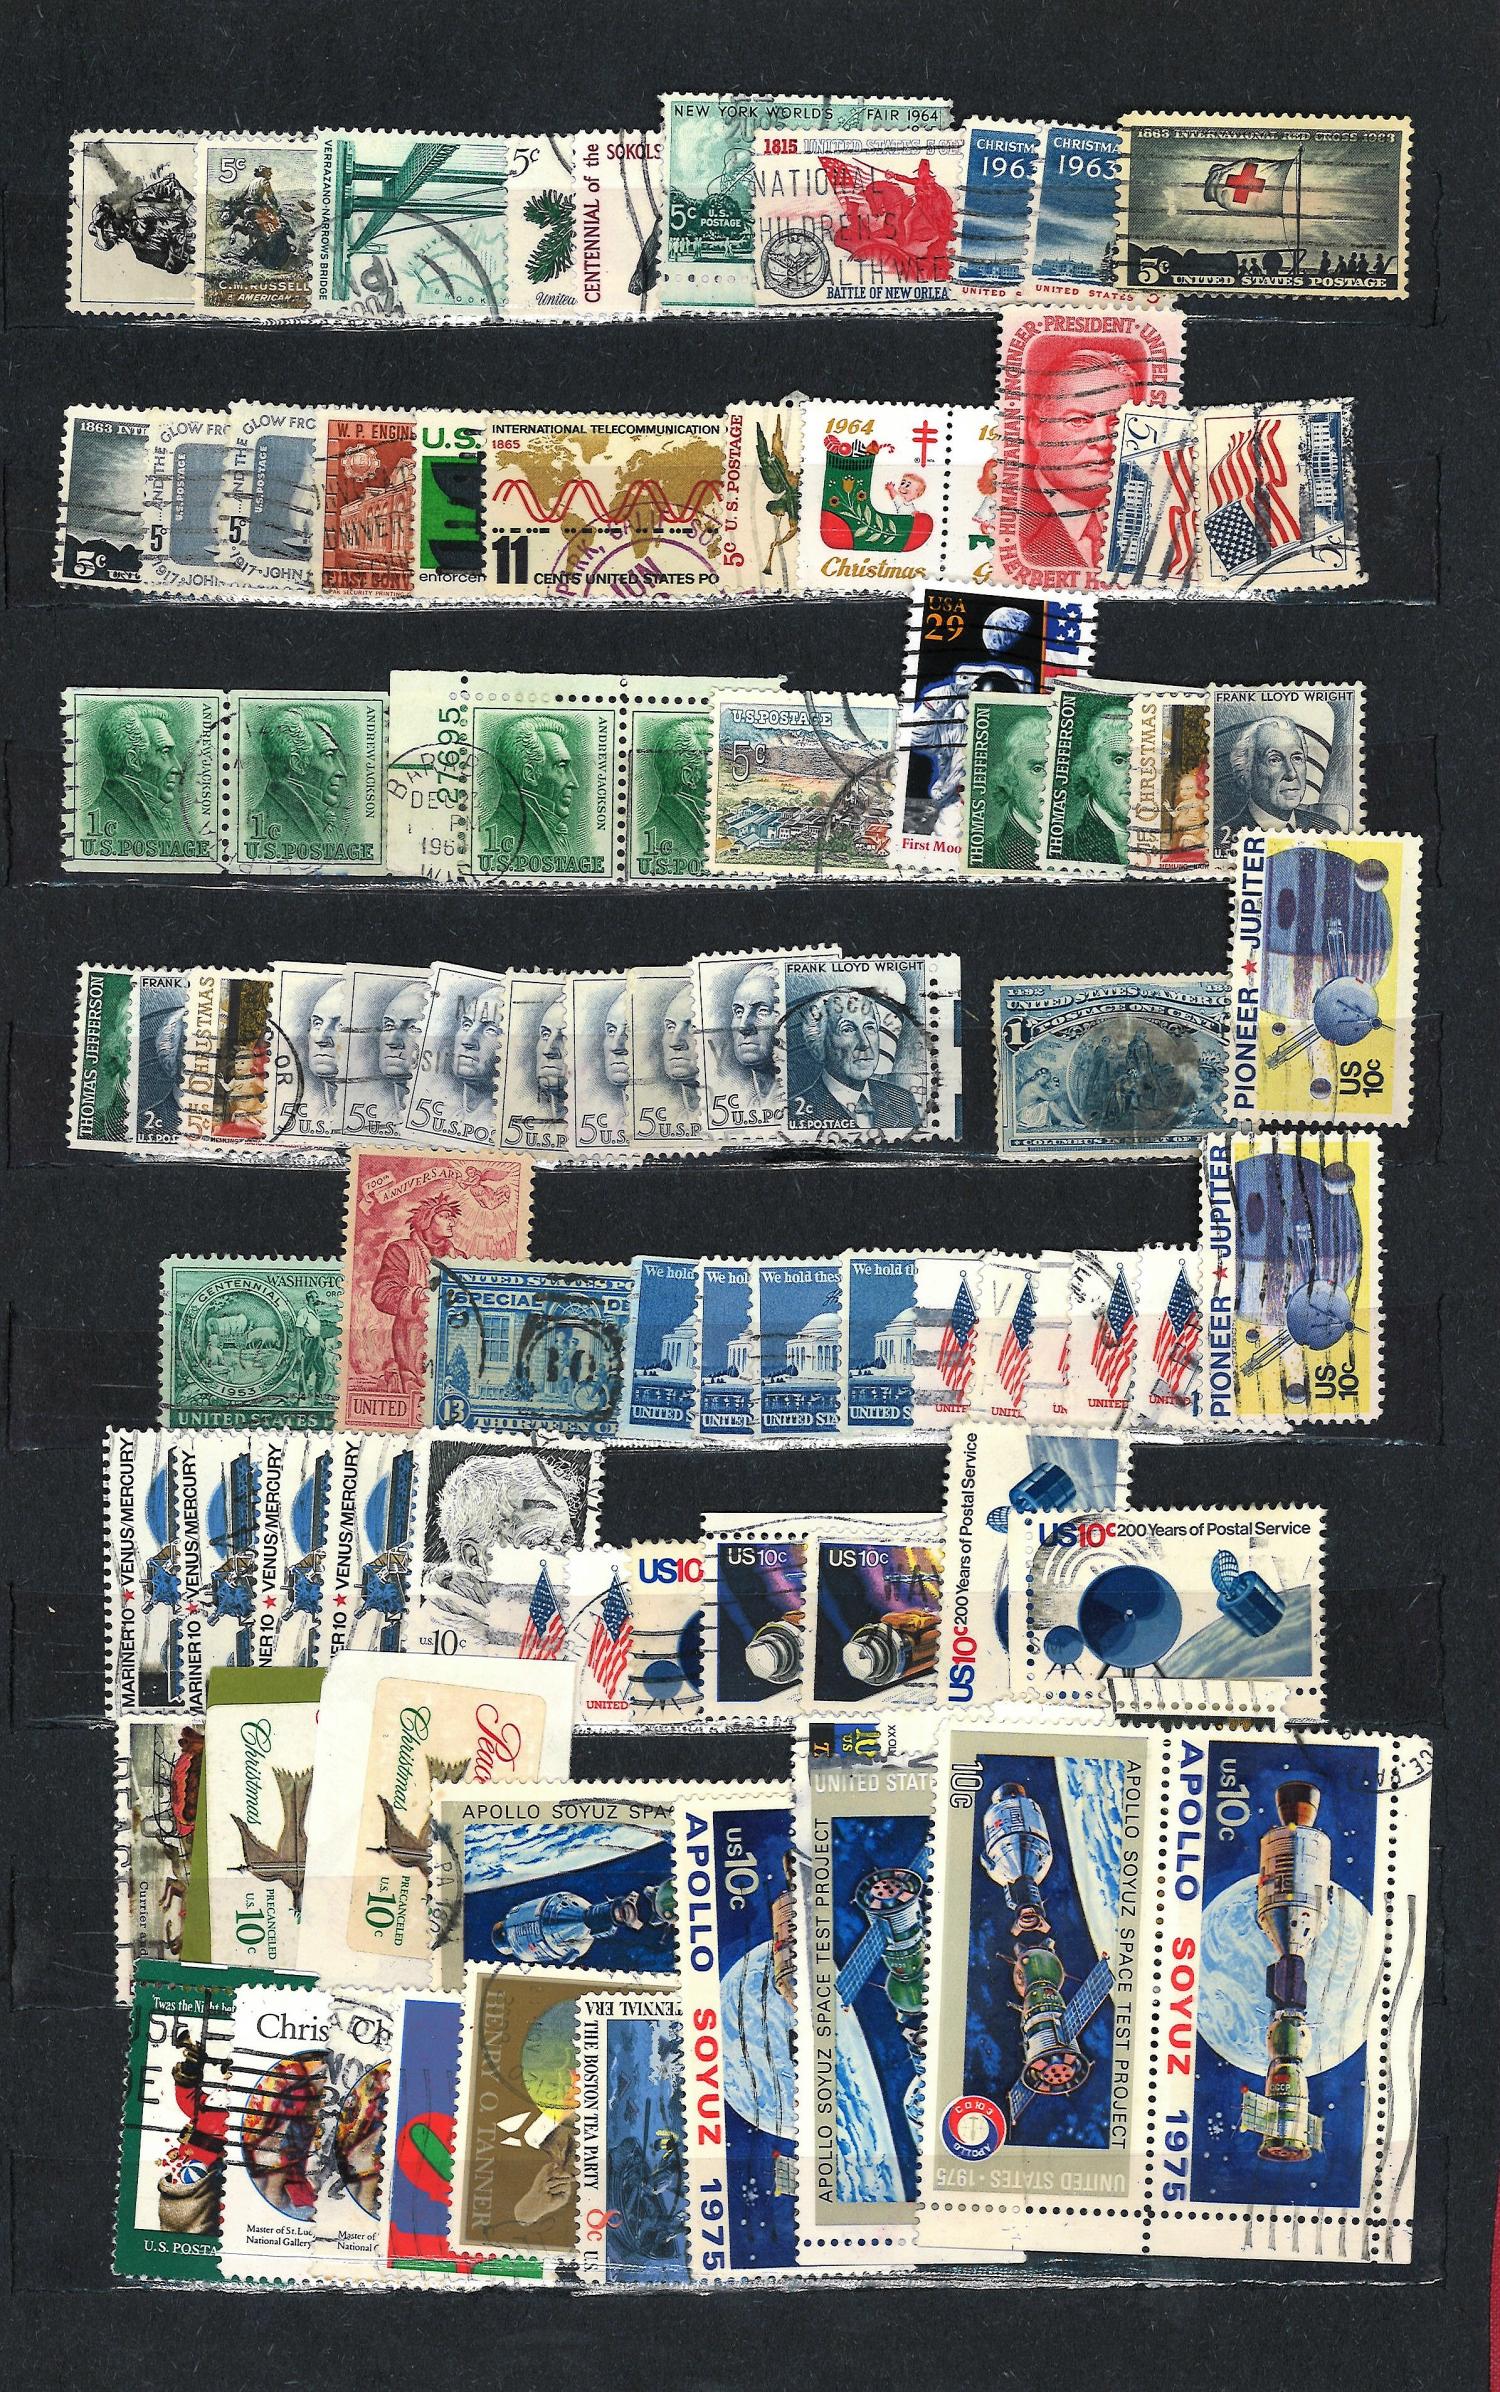 World stamp collection in red stockbook 20 pages of stamps from around the world including USA and - Image 9 of 9